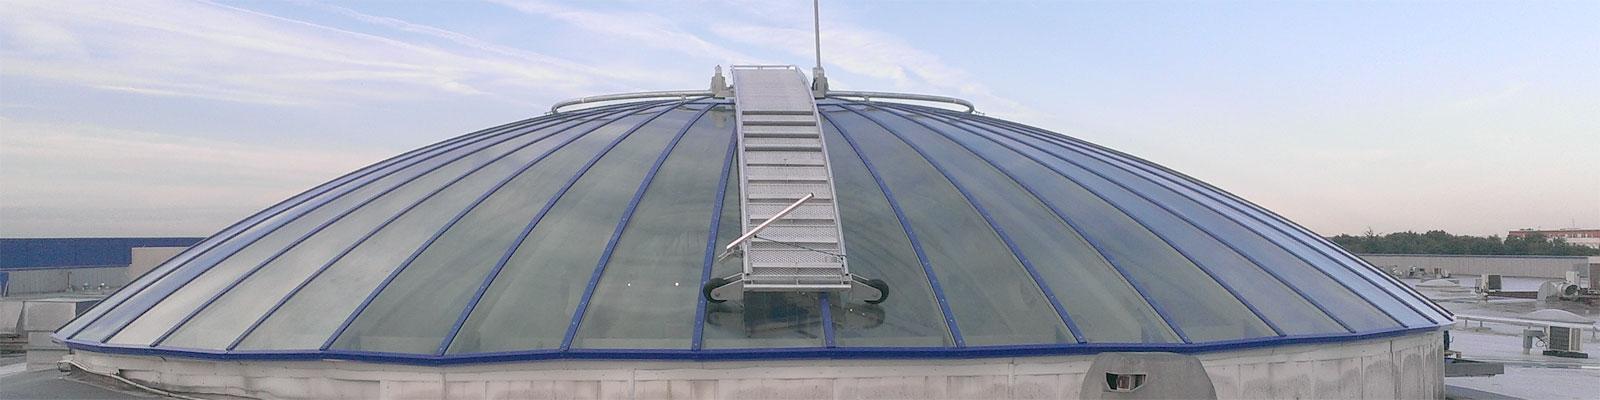 Project-PC-Rooflight1g